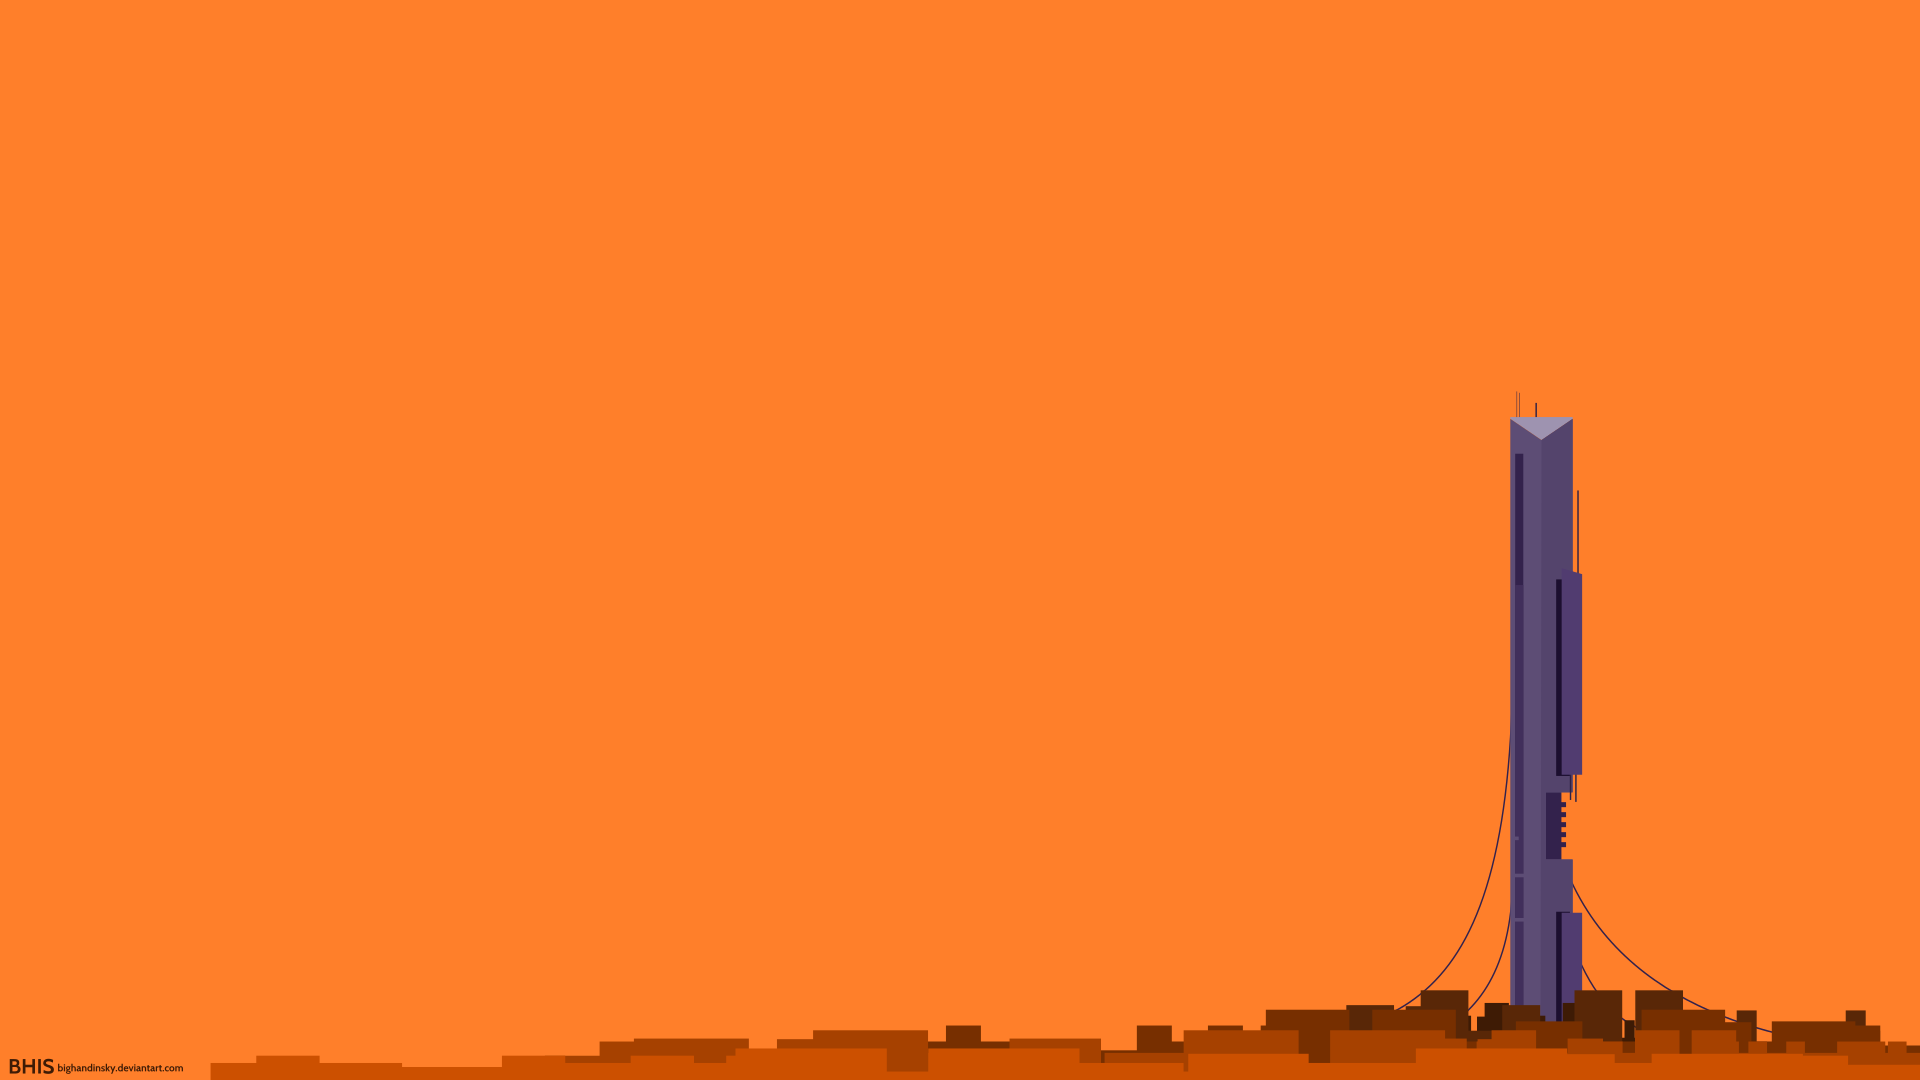 General 1920x1080 minimalism selective coloring Half-Life 2 The Citadel Combine video games artwork video game art orange background simple background science fiction